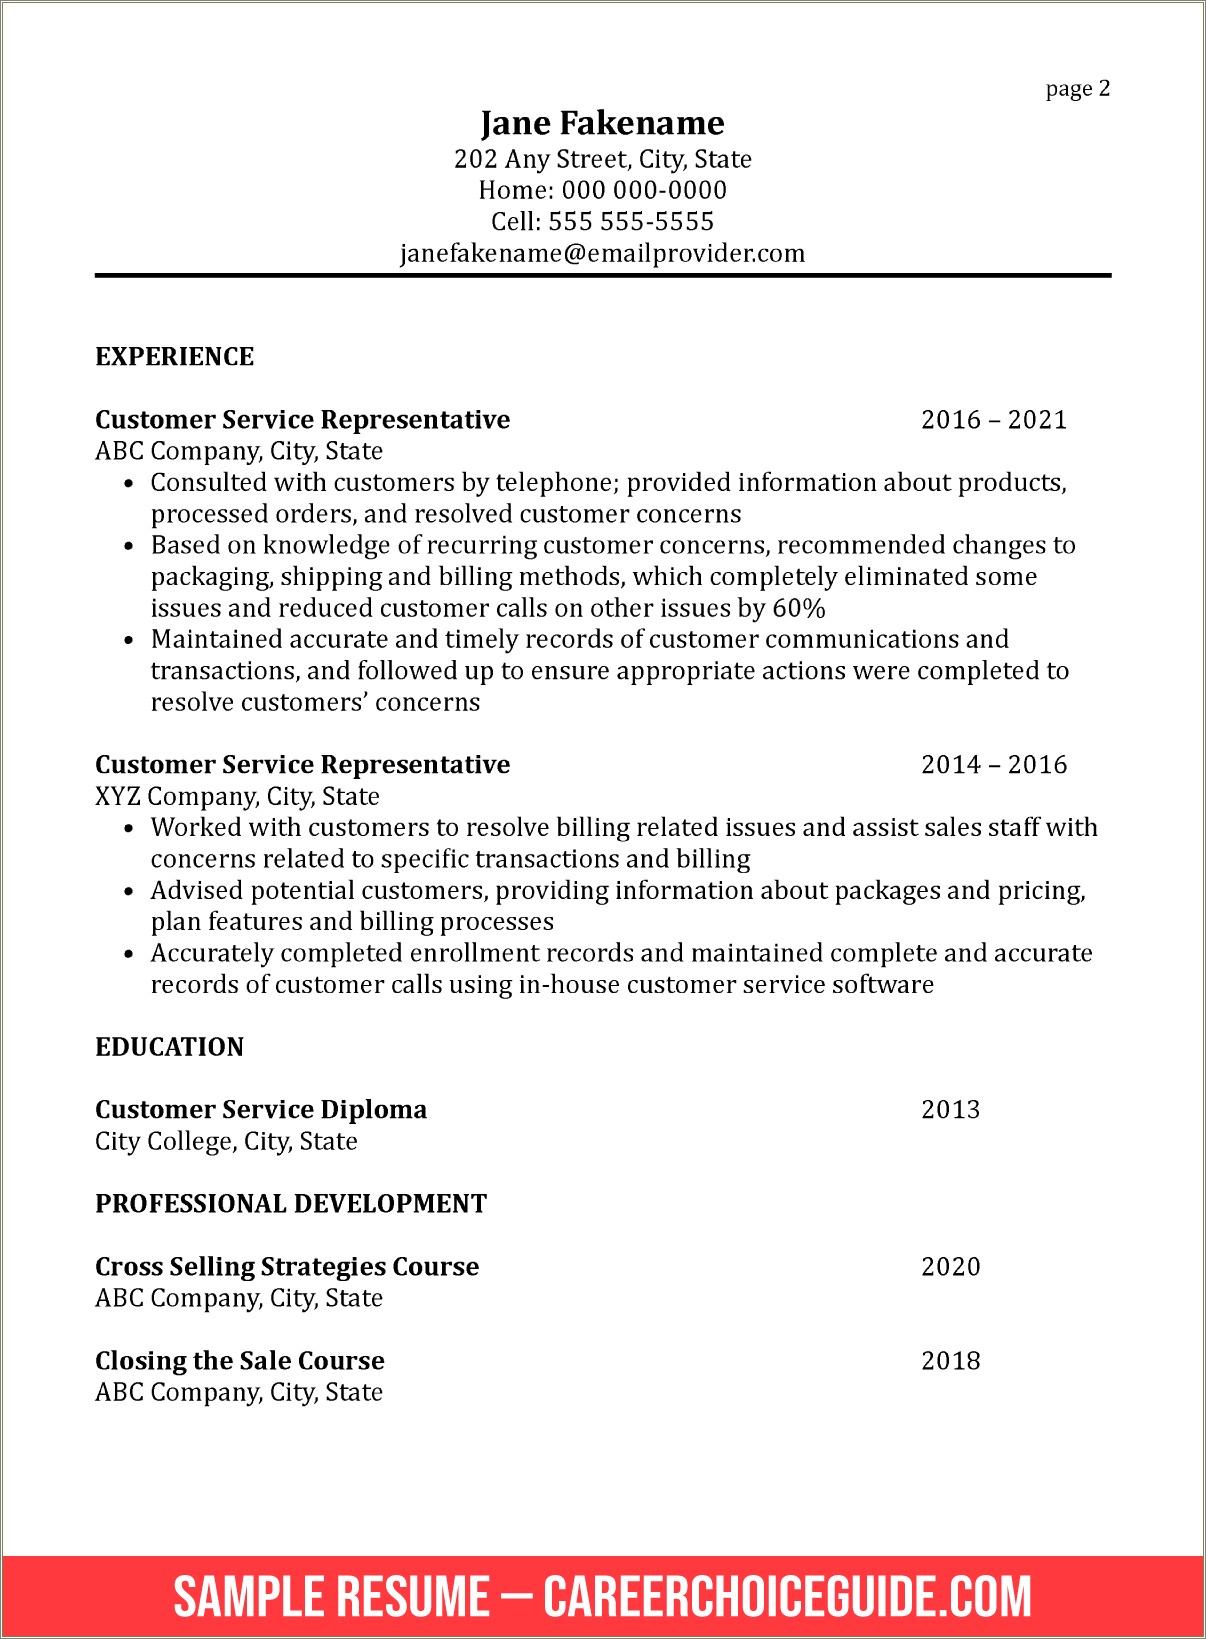 Resume Objective For Client Service Representative